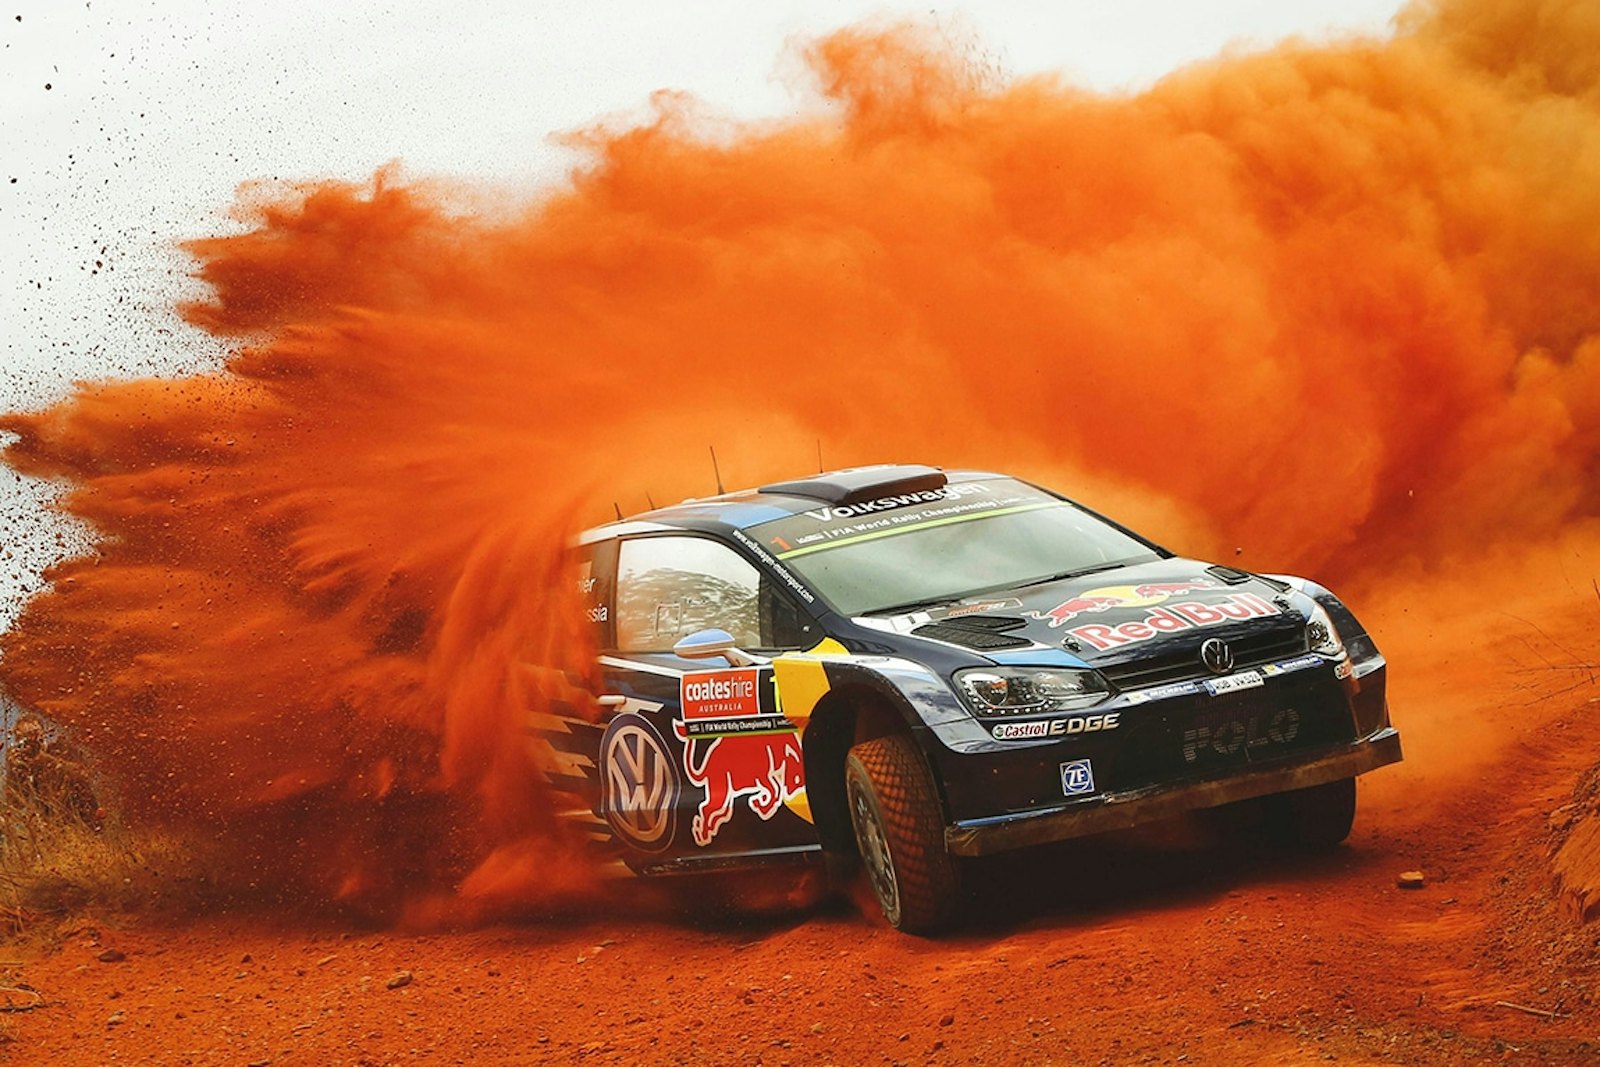 Sebastien Ogier performs during the FIA World Rally Championship 2015 in Coffs Harbour, Australia on September 10, 2015 // @World / Red Bull Content Pool // P-20150914-00556 // Usage for editorial use only // Please go to www.redbullcontentpool.com for further information. //